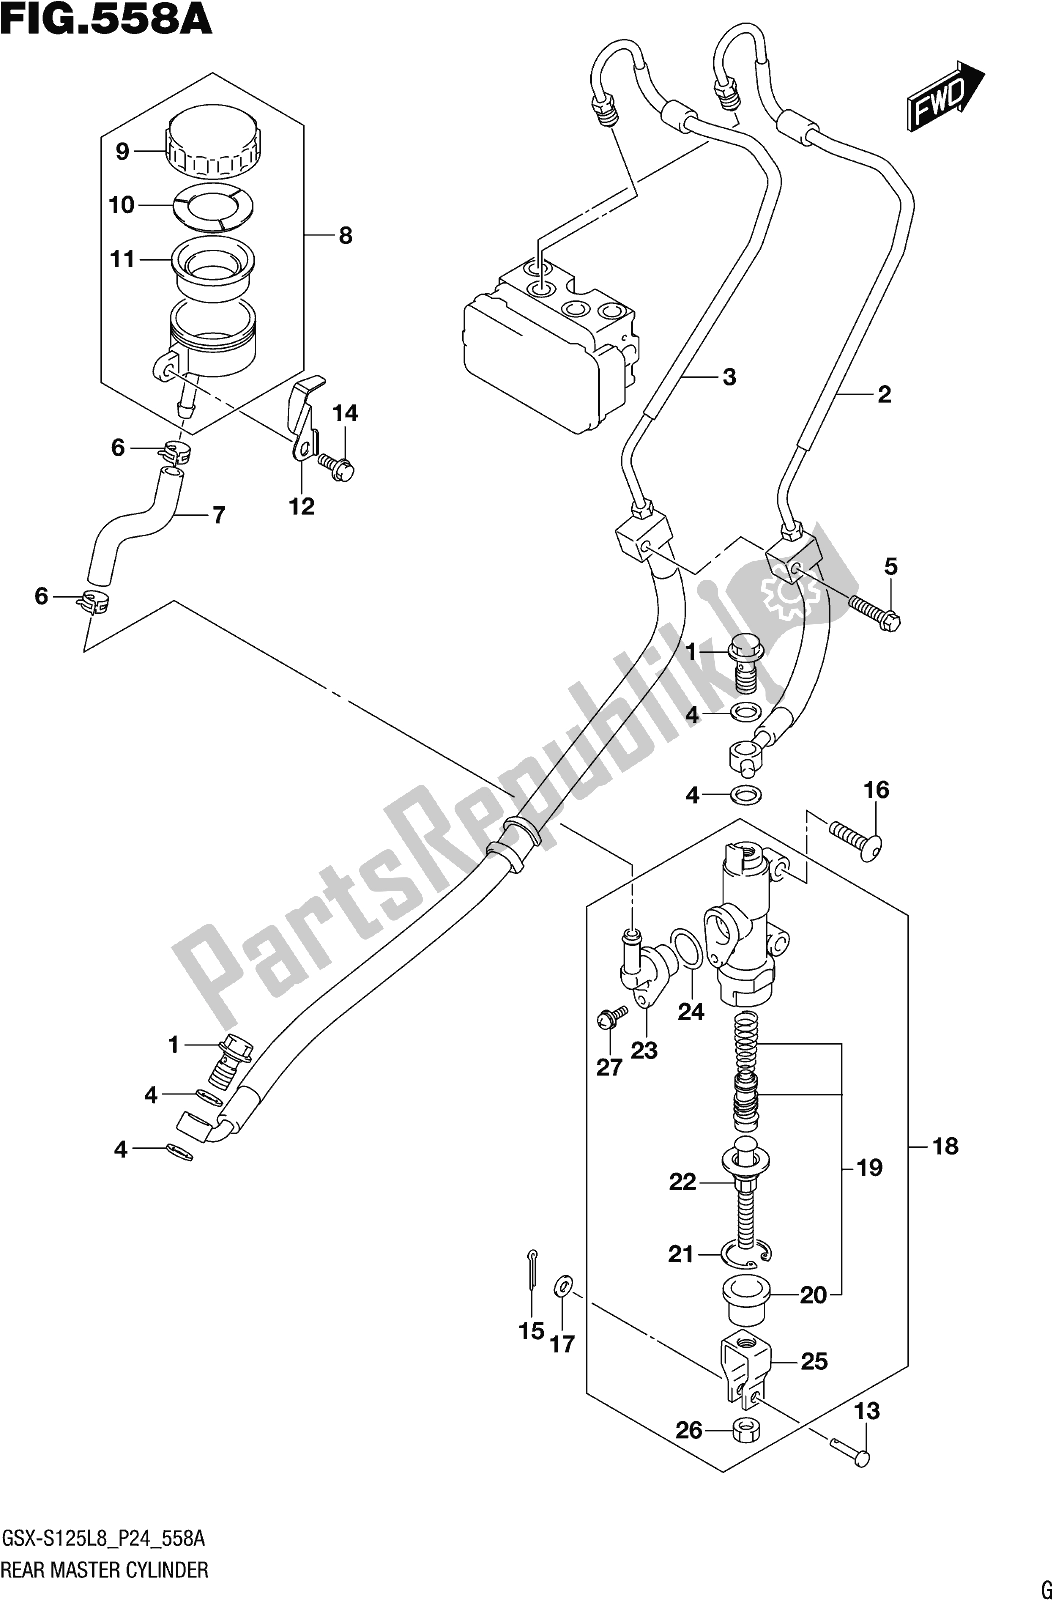 All parts for the Fig. 558a Rear Master Cylinder of the Suzuki Gsx-s 125 ML 2018